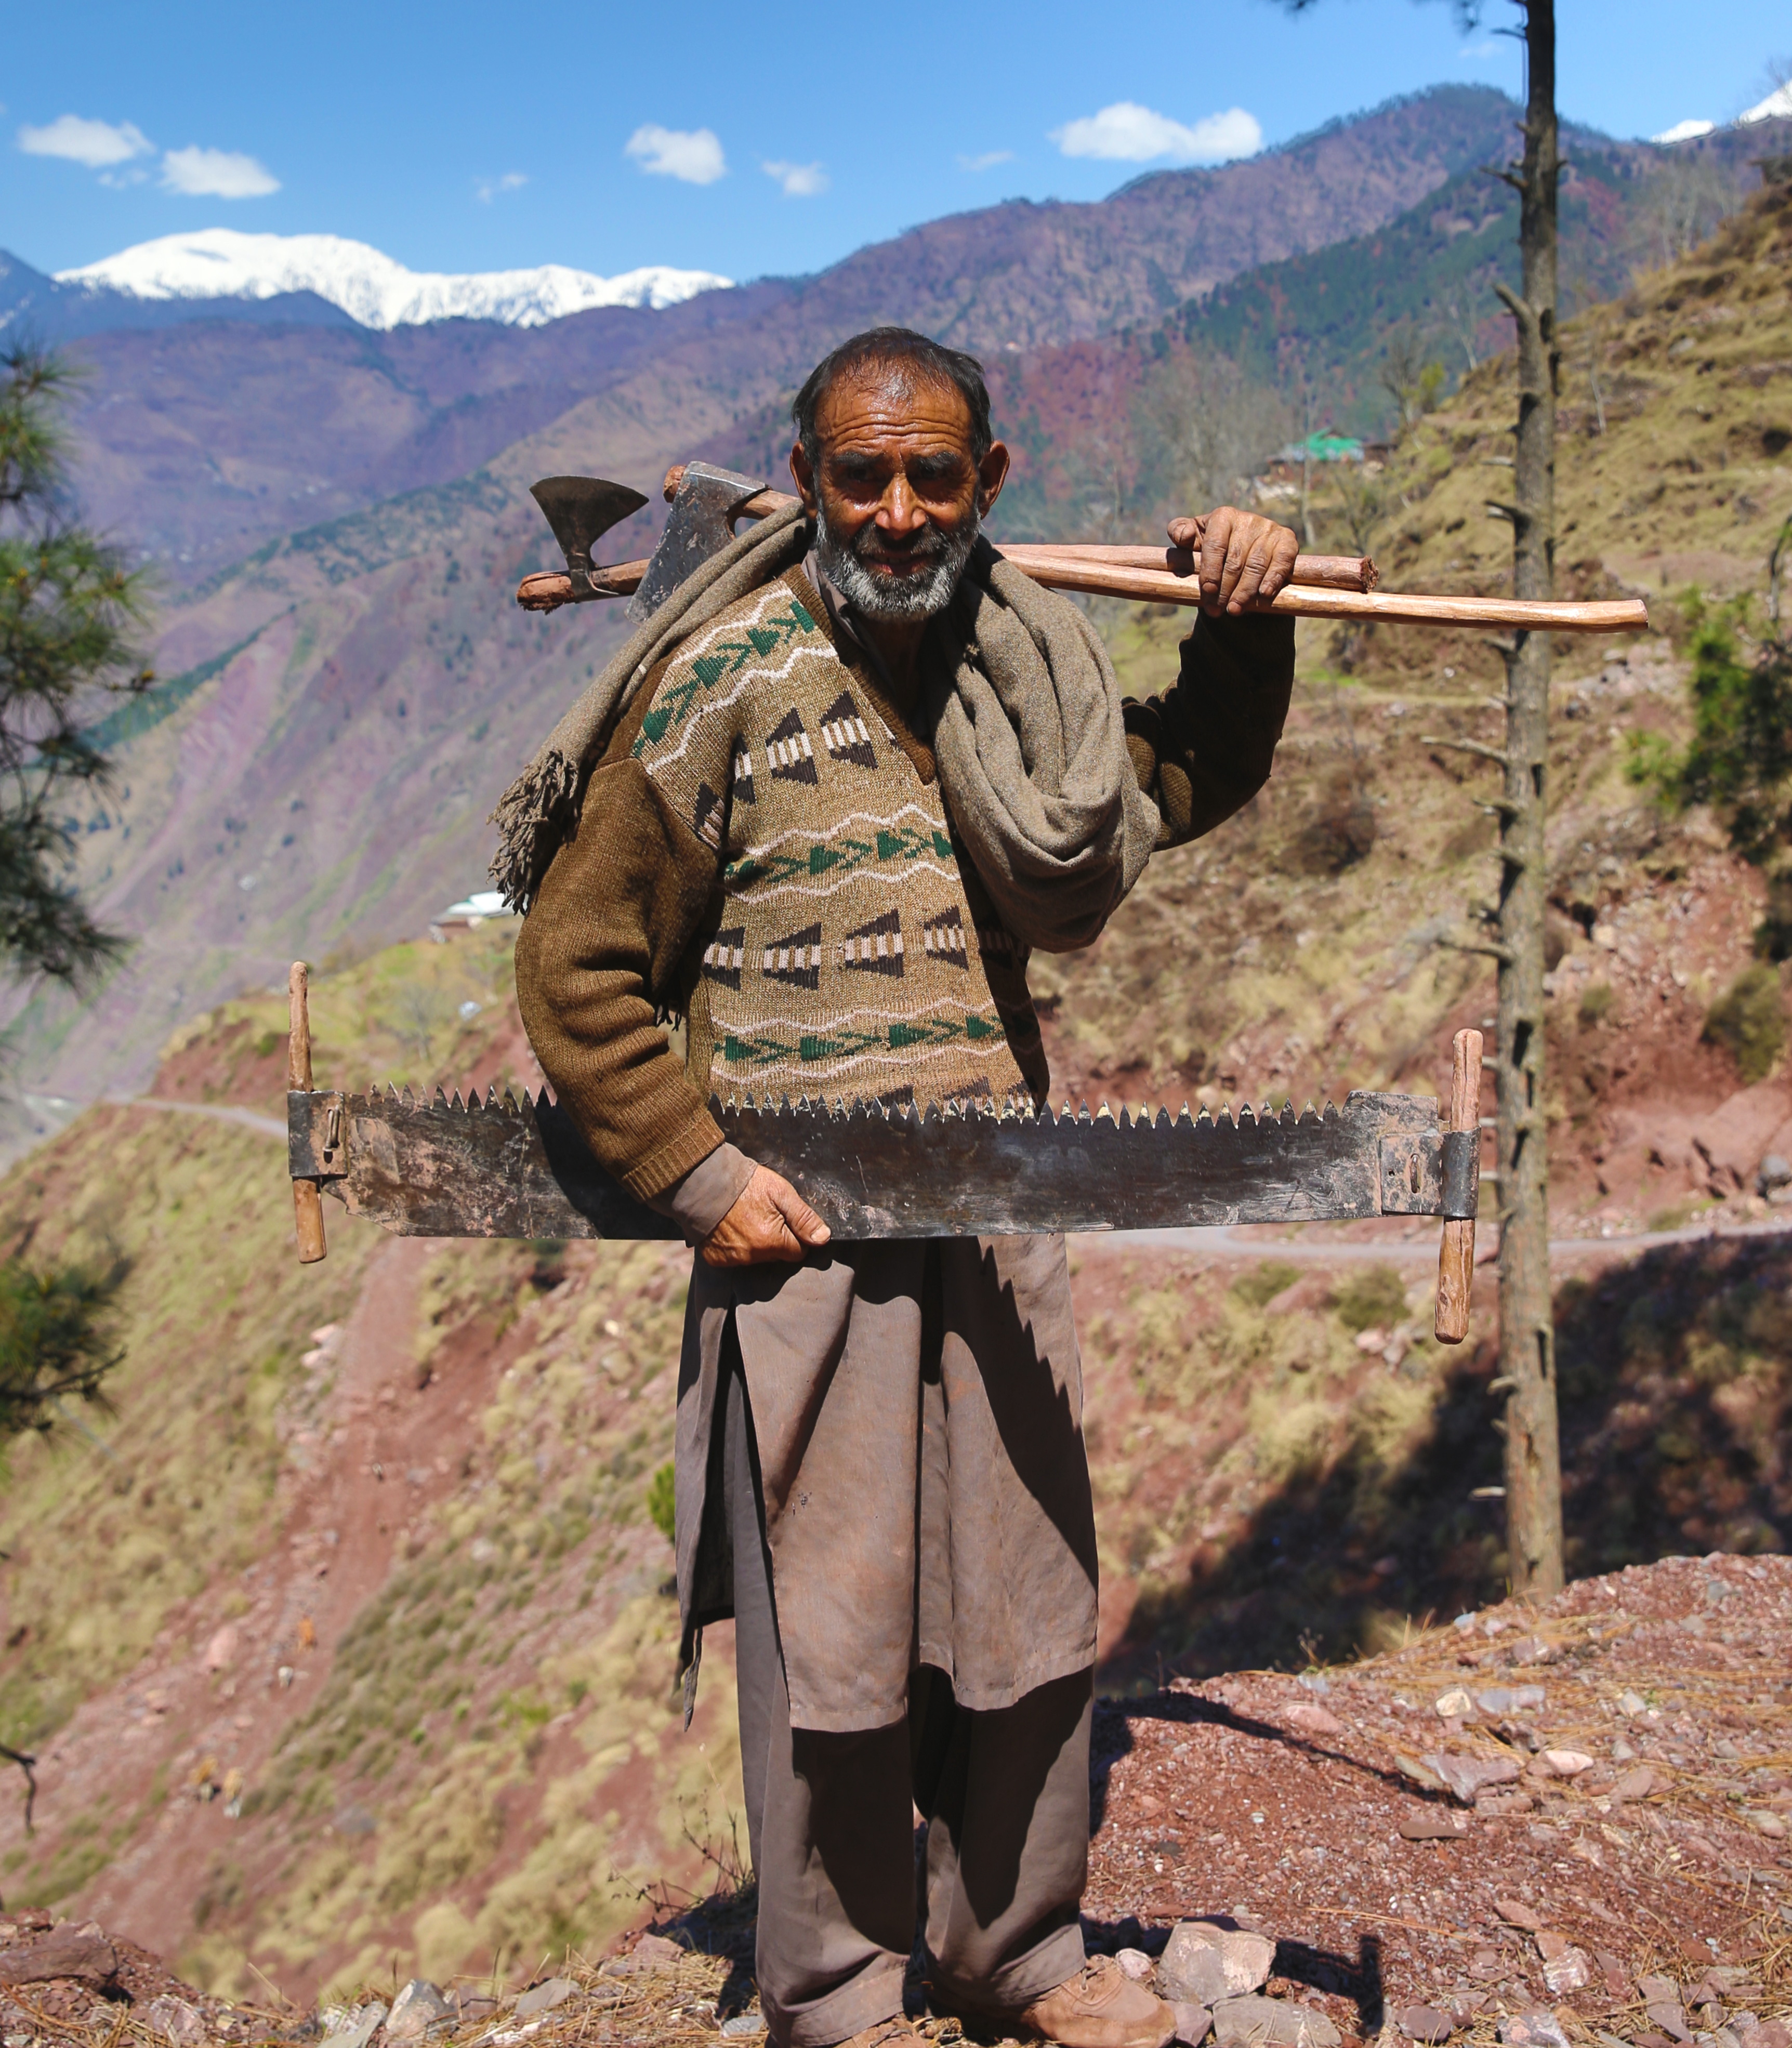 Woodcutter with his tools near Kanoor, Kashmir